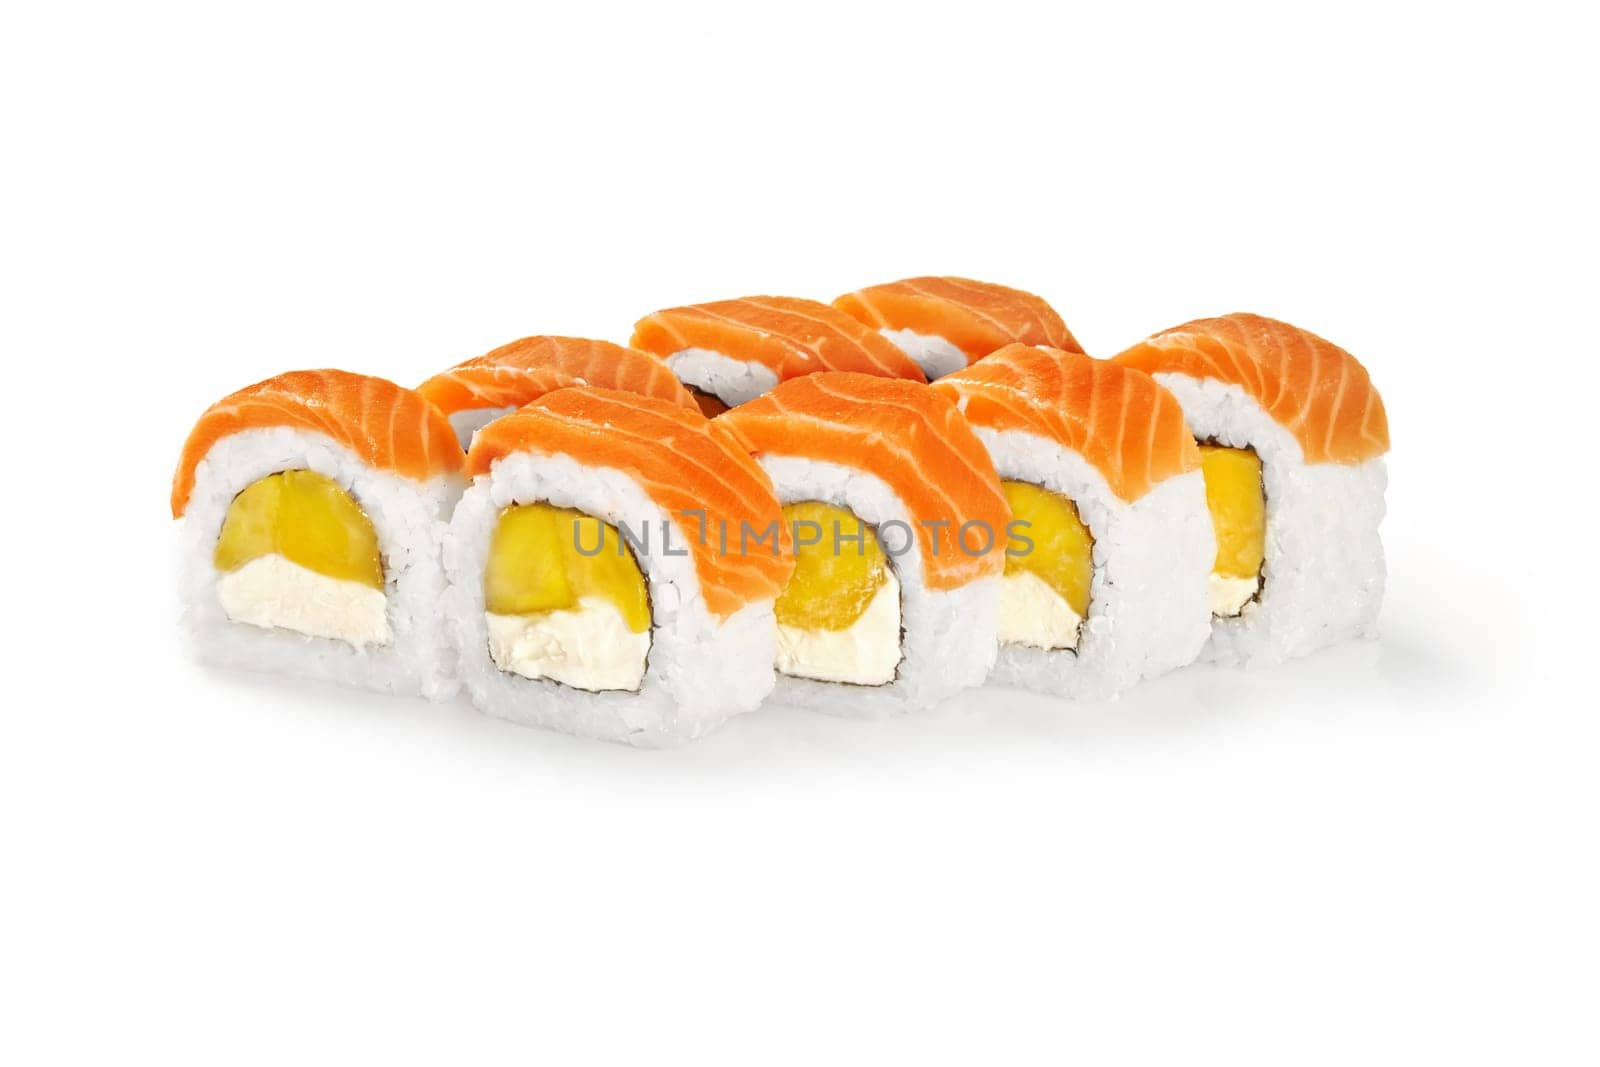 Exotic salmon sushi rolls filled with cream cheese and sweet ripe mango slices, presented on white background. Japanese style cuisine